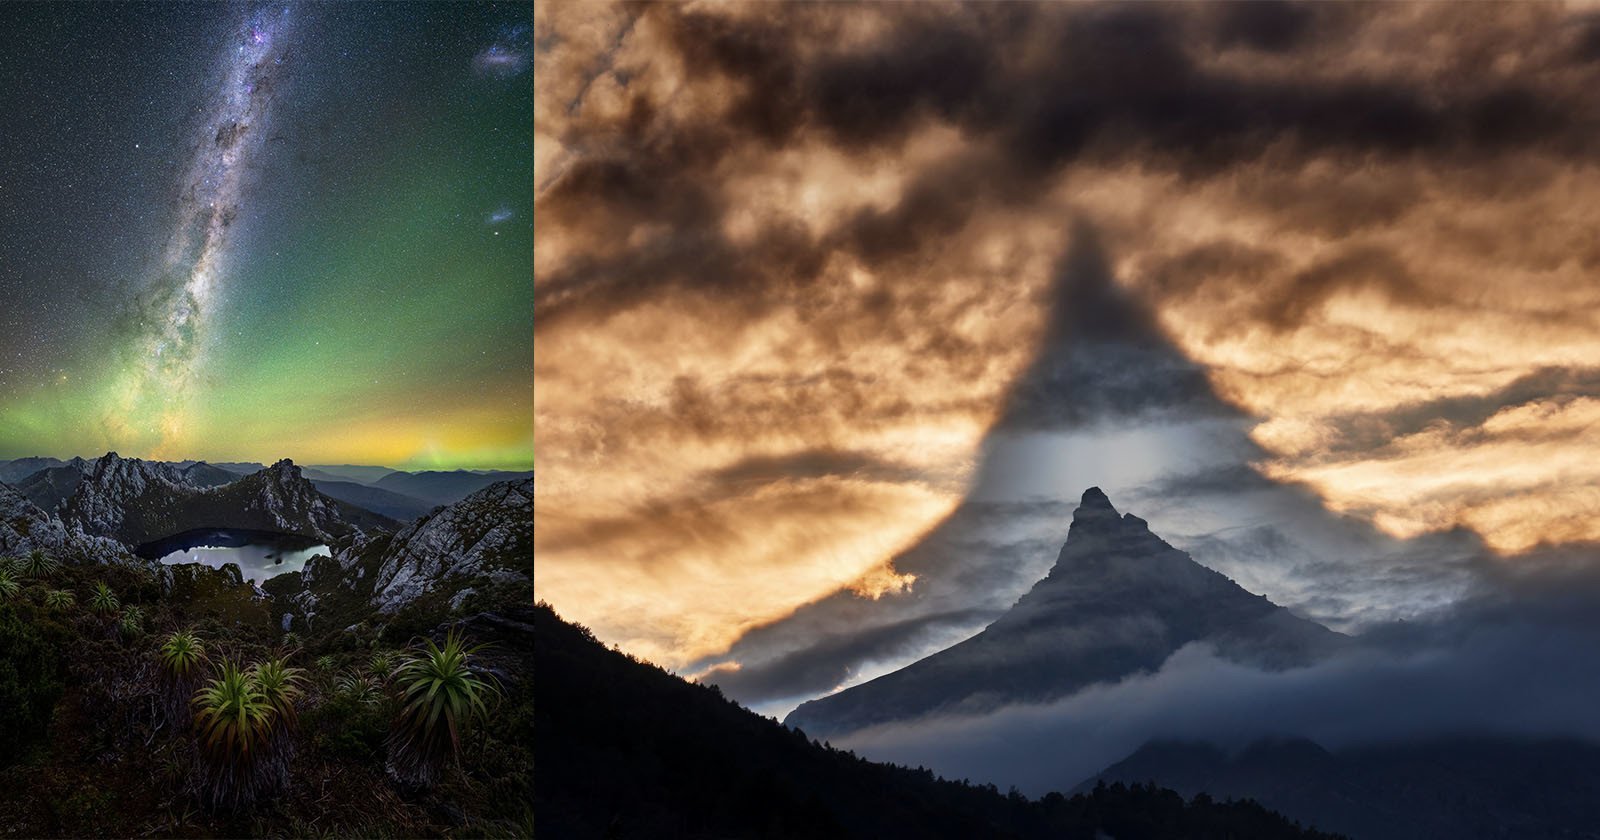 Landscape Photo Awards That ‘Value Authenticity’ Announce 2022 Winners